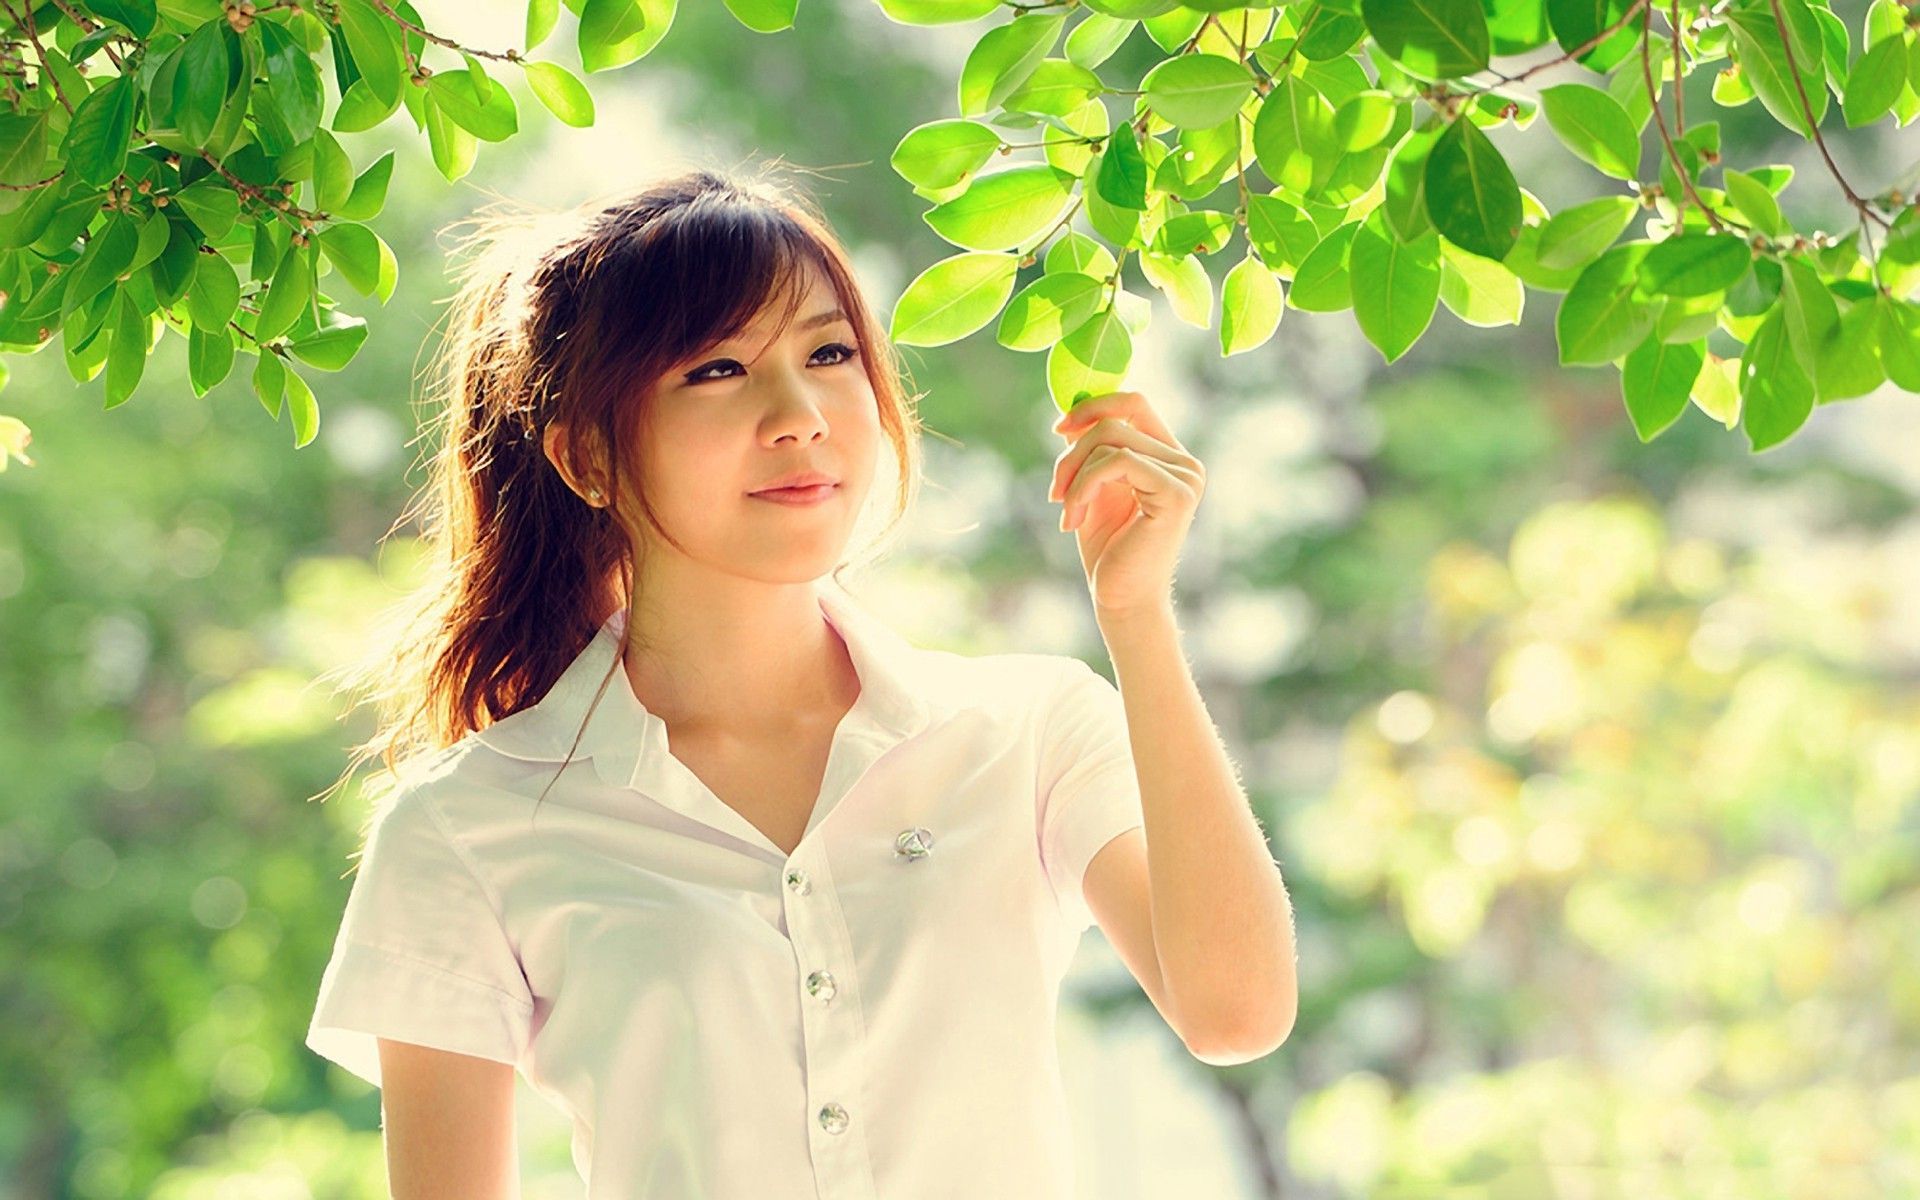 Best Chinese Girl Wallpaper | Live HD Wallpaper HQ Pictures ...